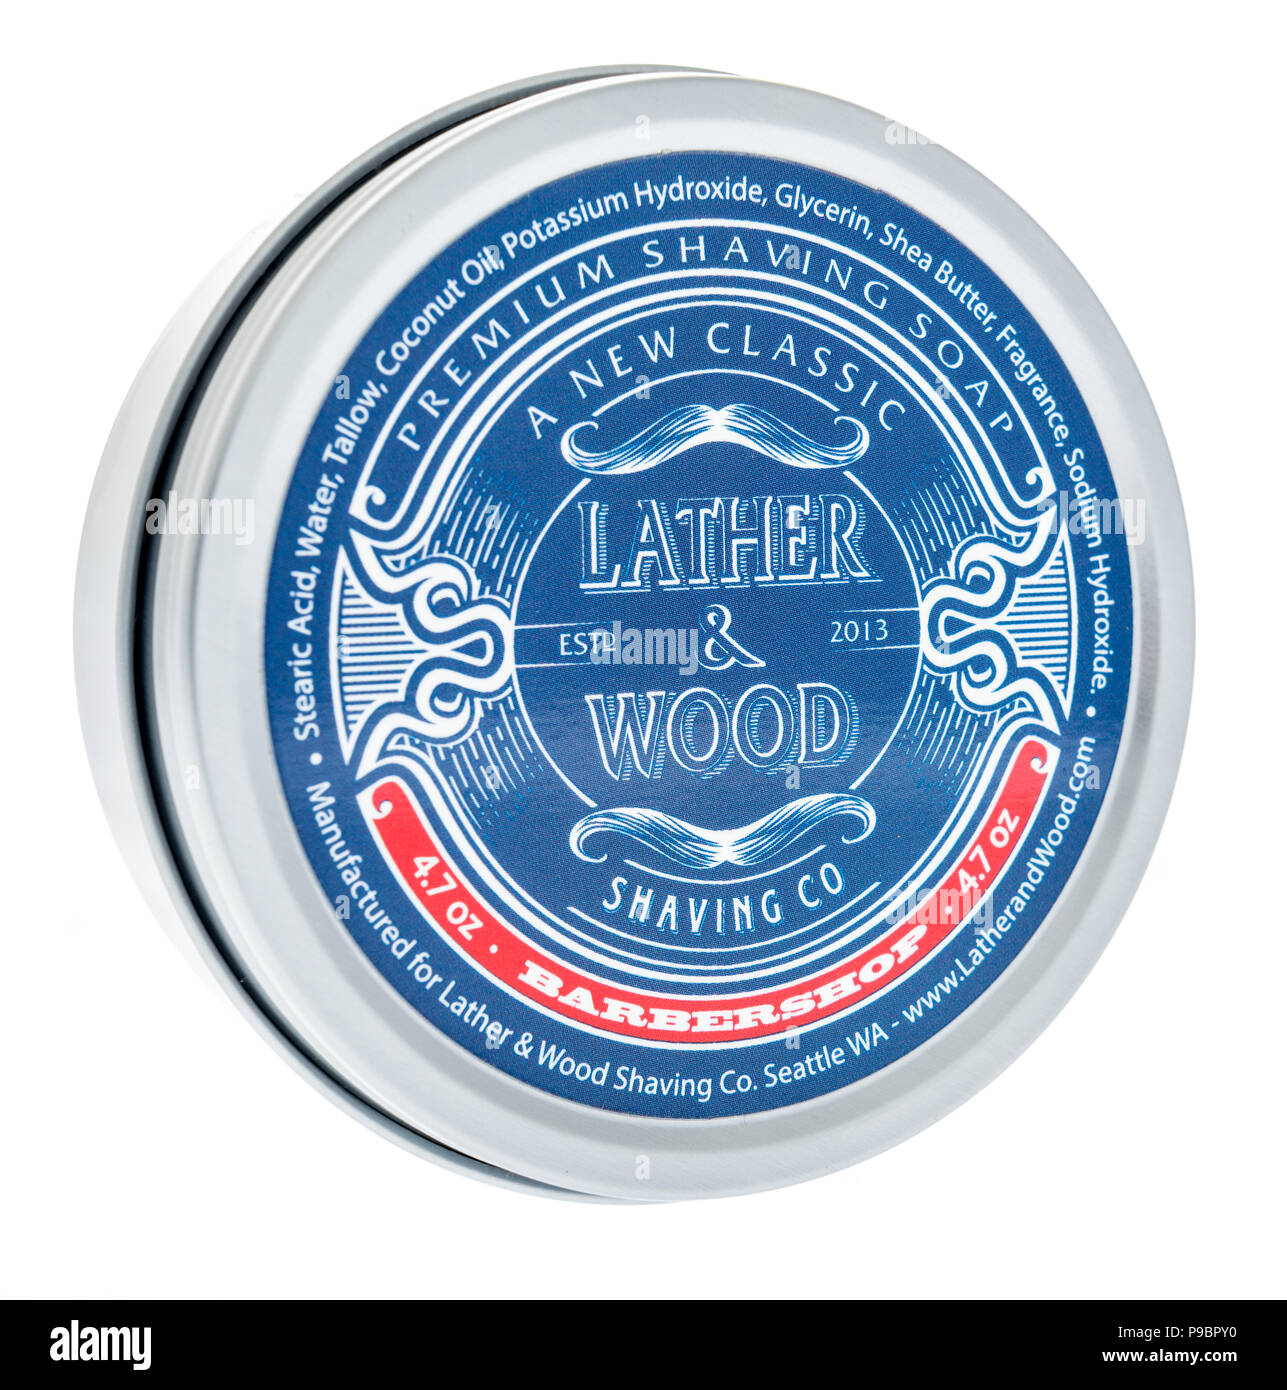 Winneconne, WI - 14 July 2018: A package of Lather and wood shaving soap barbershop on an isolated background. Stock Photo